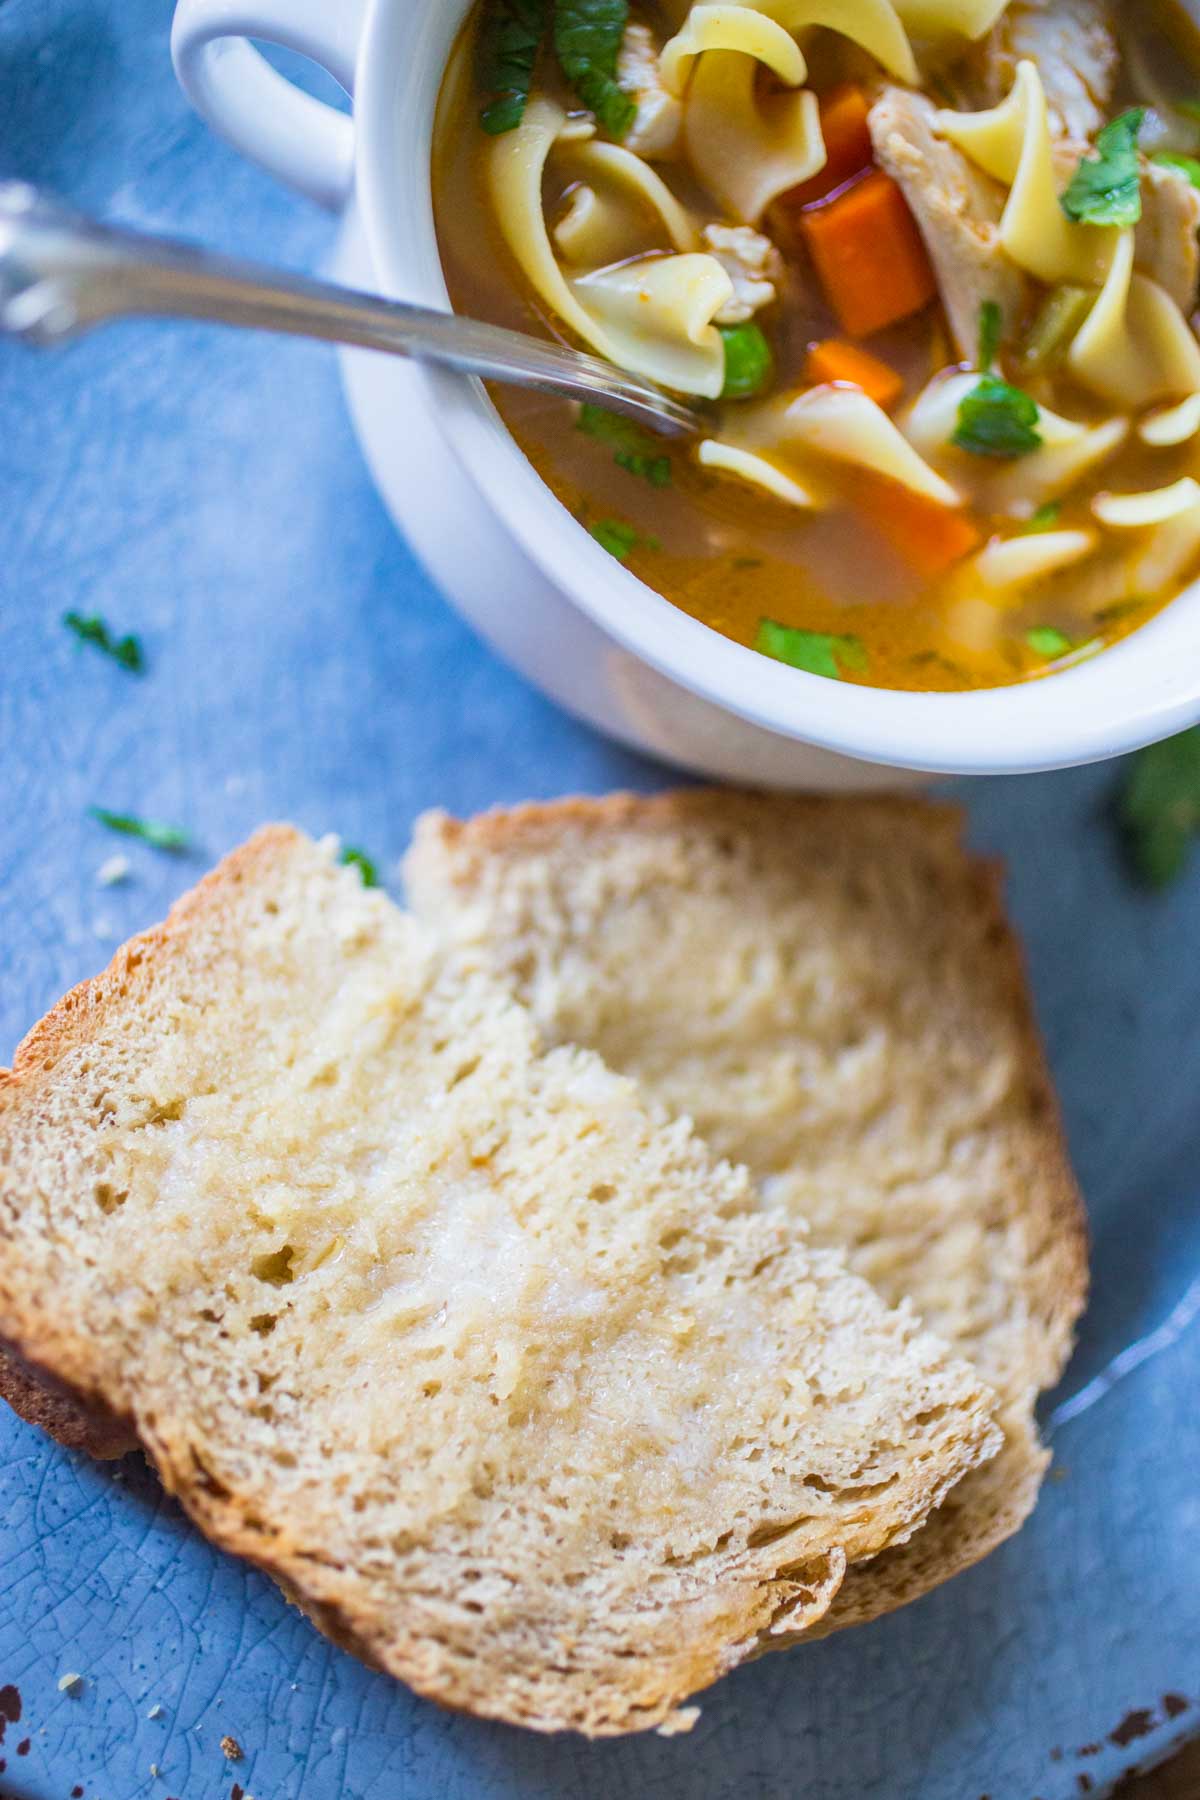 A bowl of chicken soup sits on a blue plate next to a buttered slice of fresh bread.